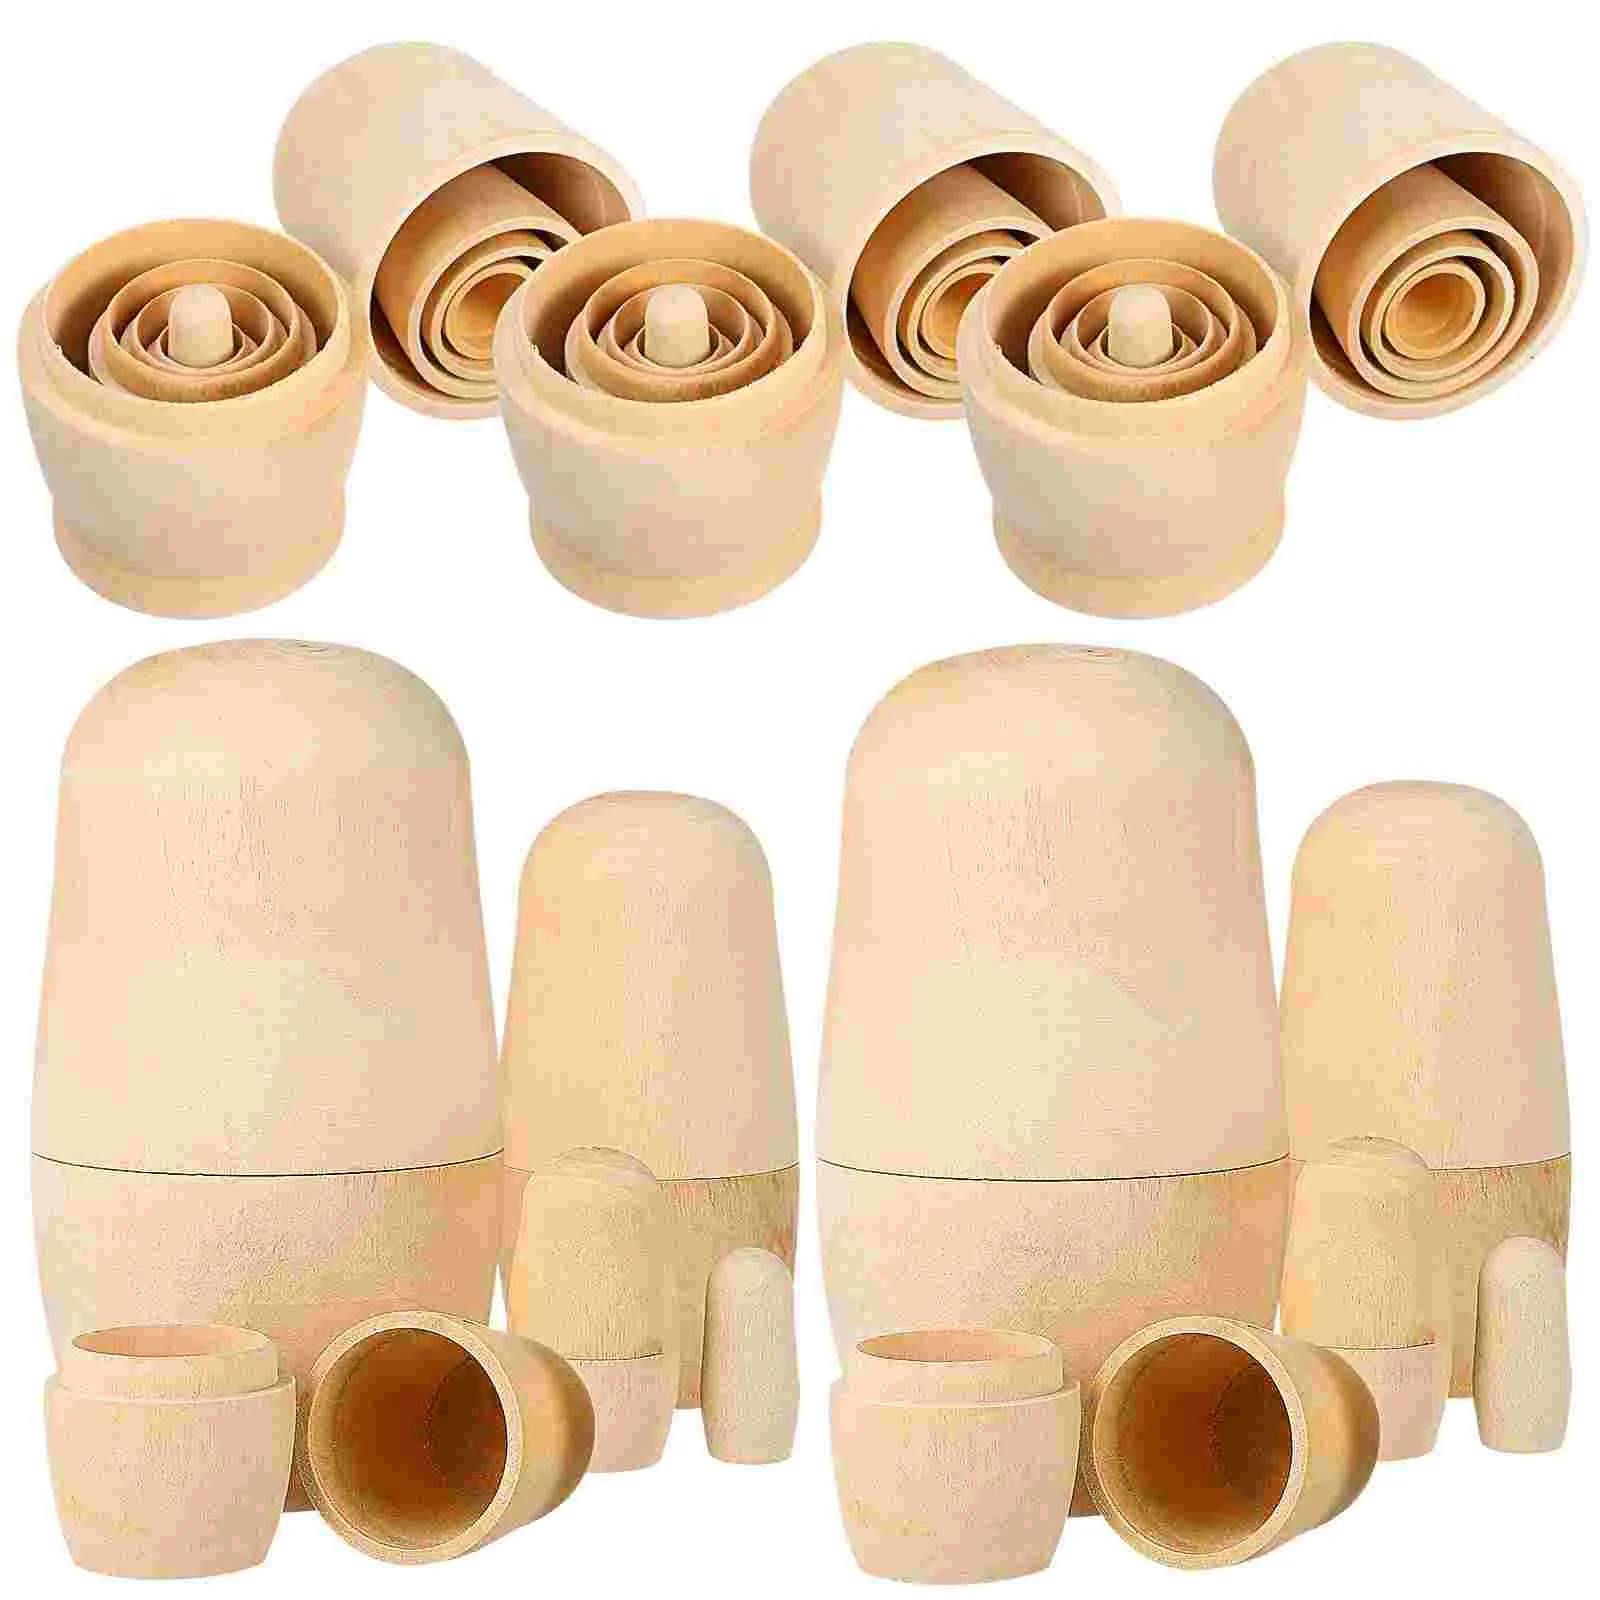 

10 Sets Matryoshka Toddler Toys Kids Russian Wood Shapes Stack Things Wooden Nesting Decor Child Painting